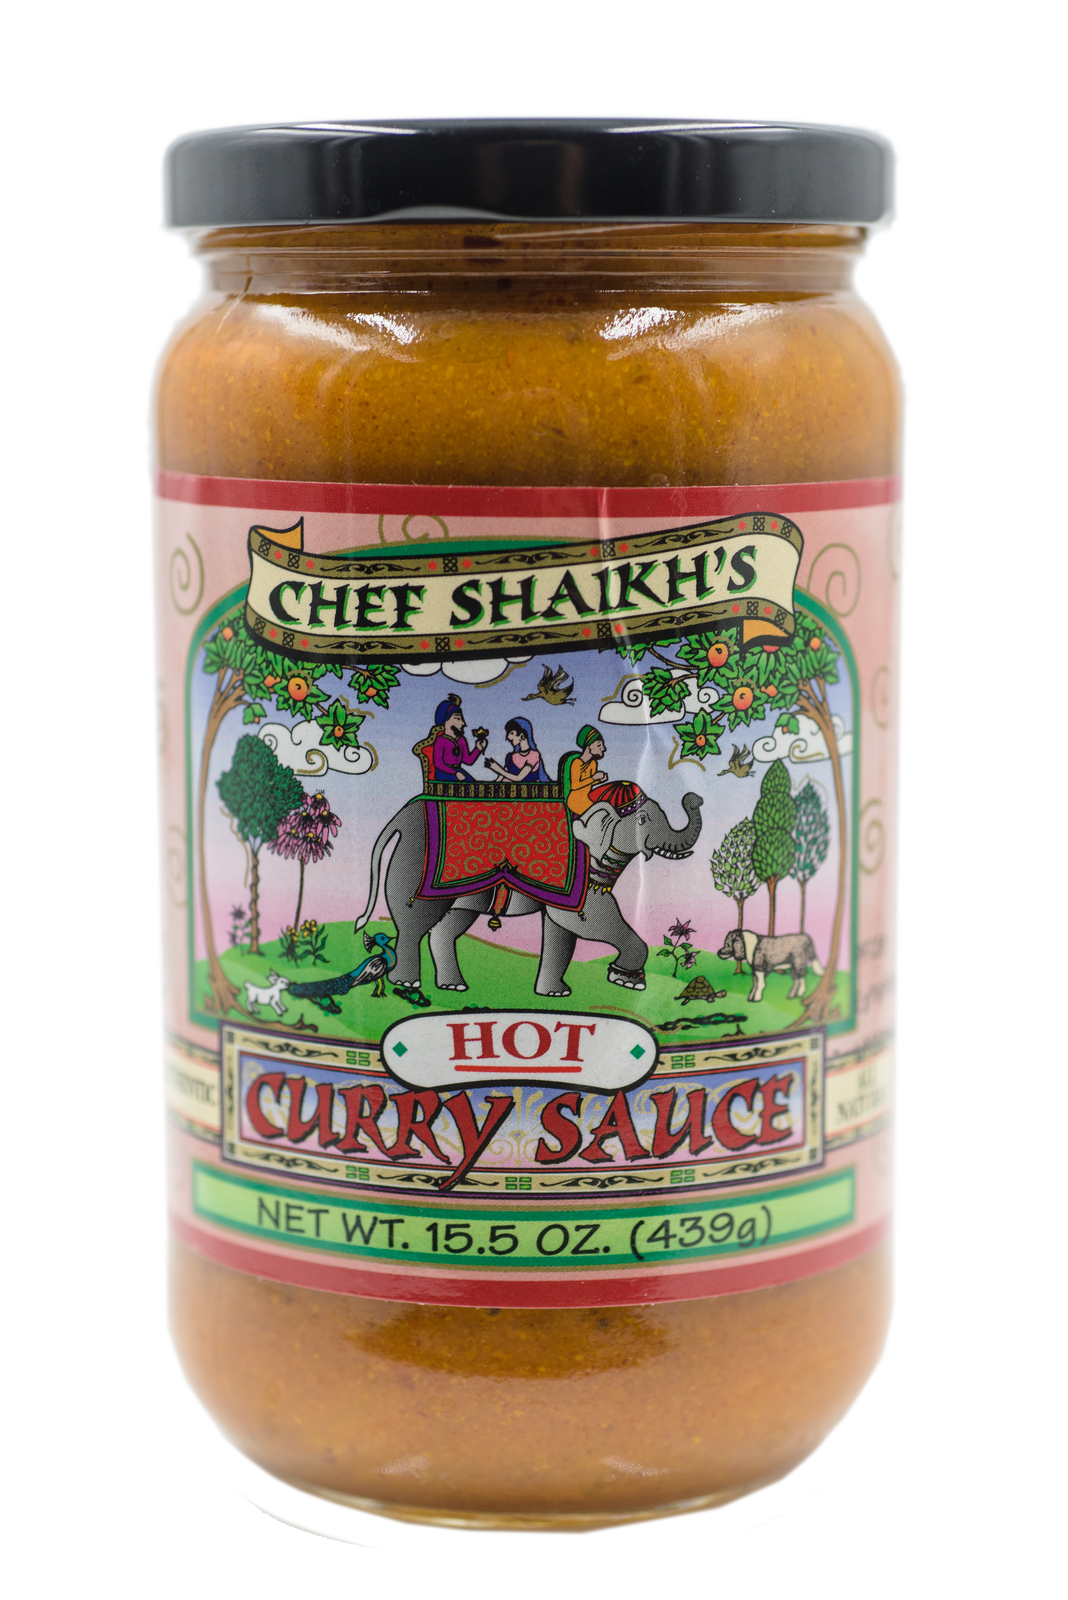 Chef Shaikh's Curry Sauce Hot, Indian Foods Co-Packing Example | Palace Foods Inc.